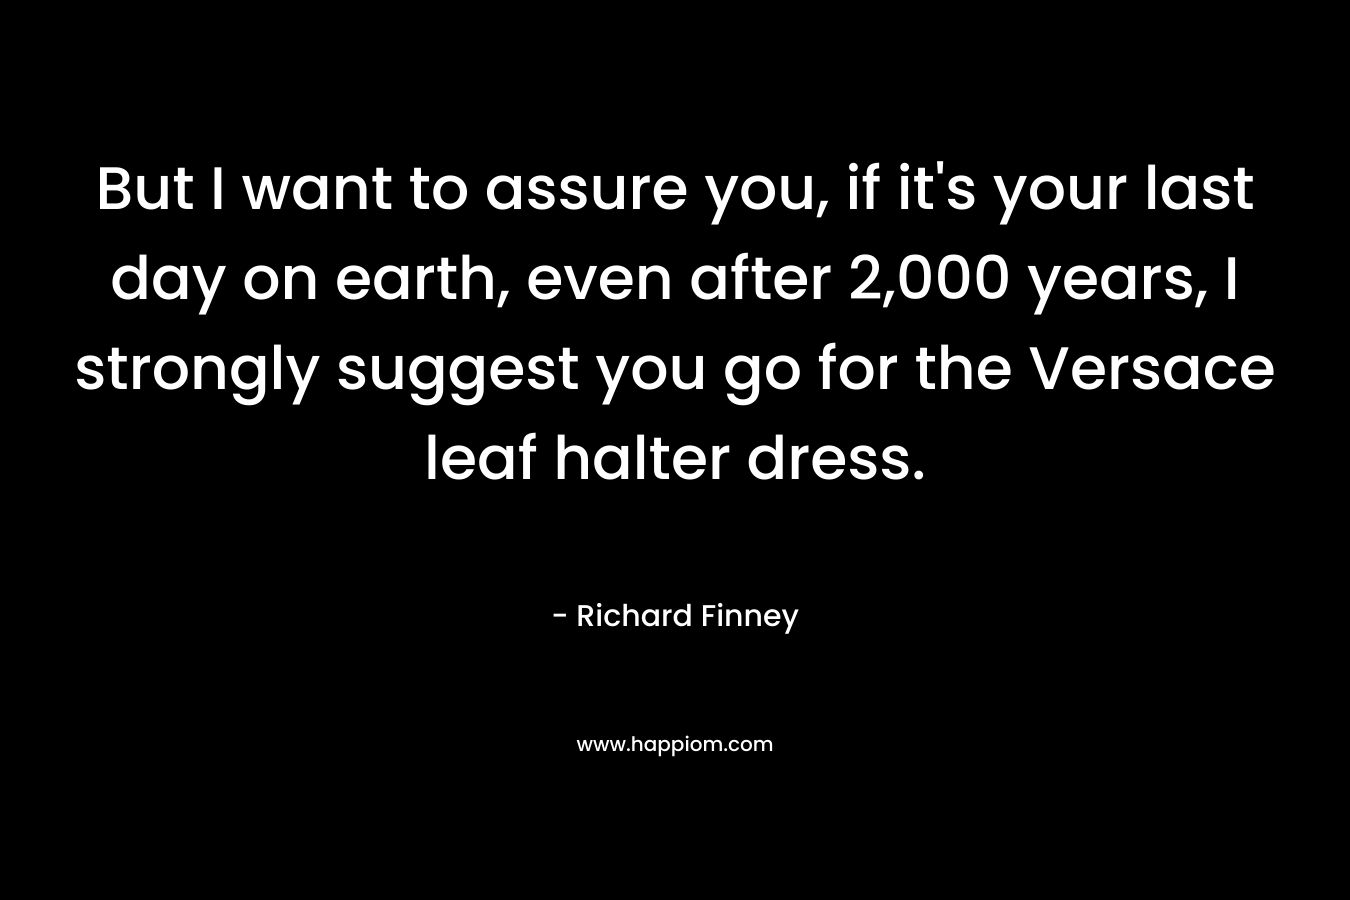 But I want to assure you, if it’s your last day on earth, even after 2,000 years, I strongly suggest you go for the Versace leaf halter dress. – Richard Finney